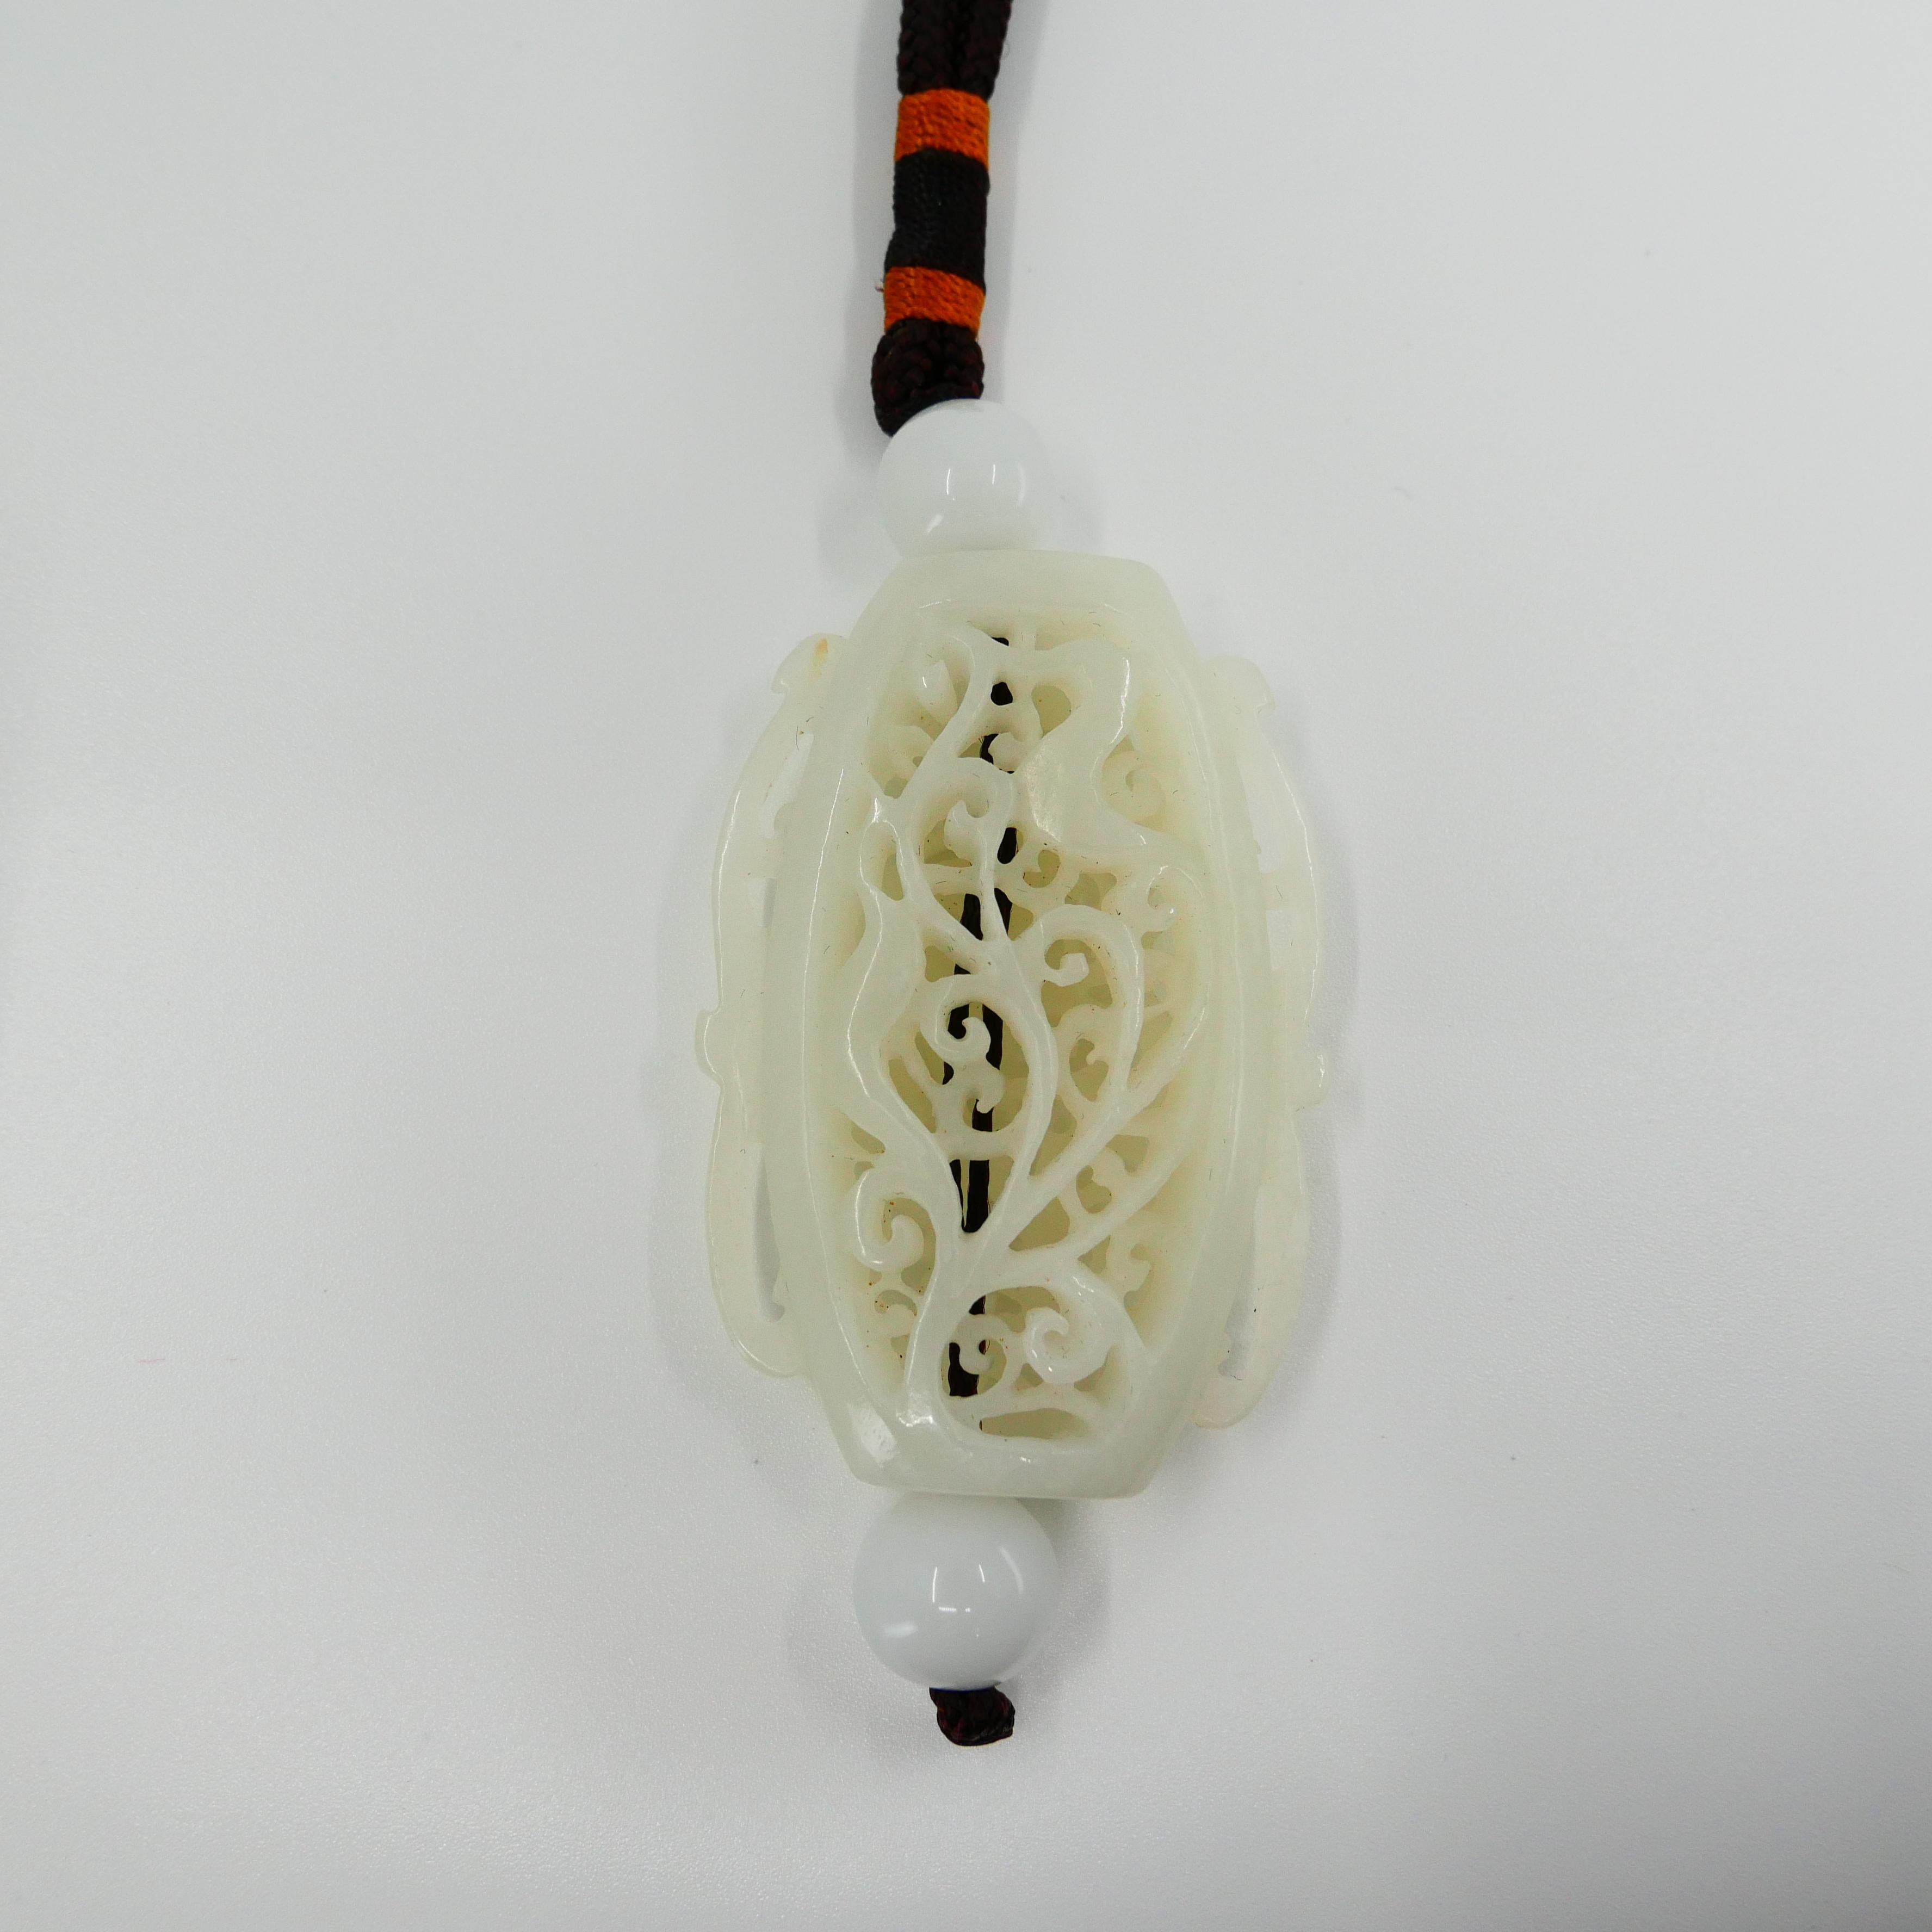 Certified Natural Nephrite White Jade Handheld Decoration Can Convert to Pendant For Sale 8